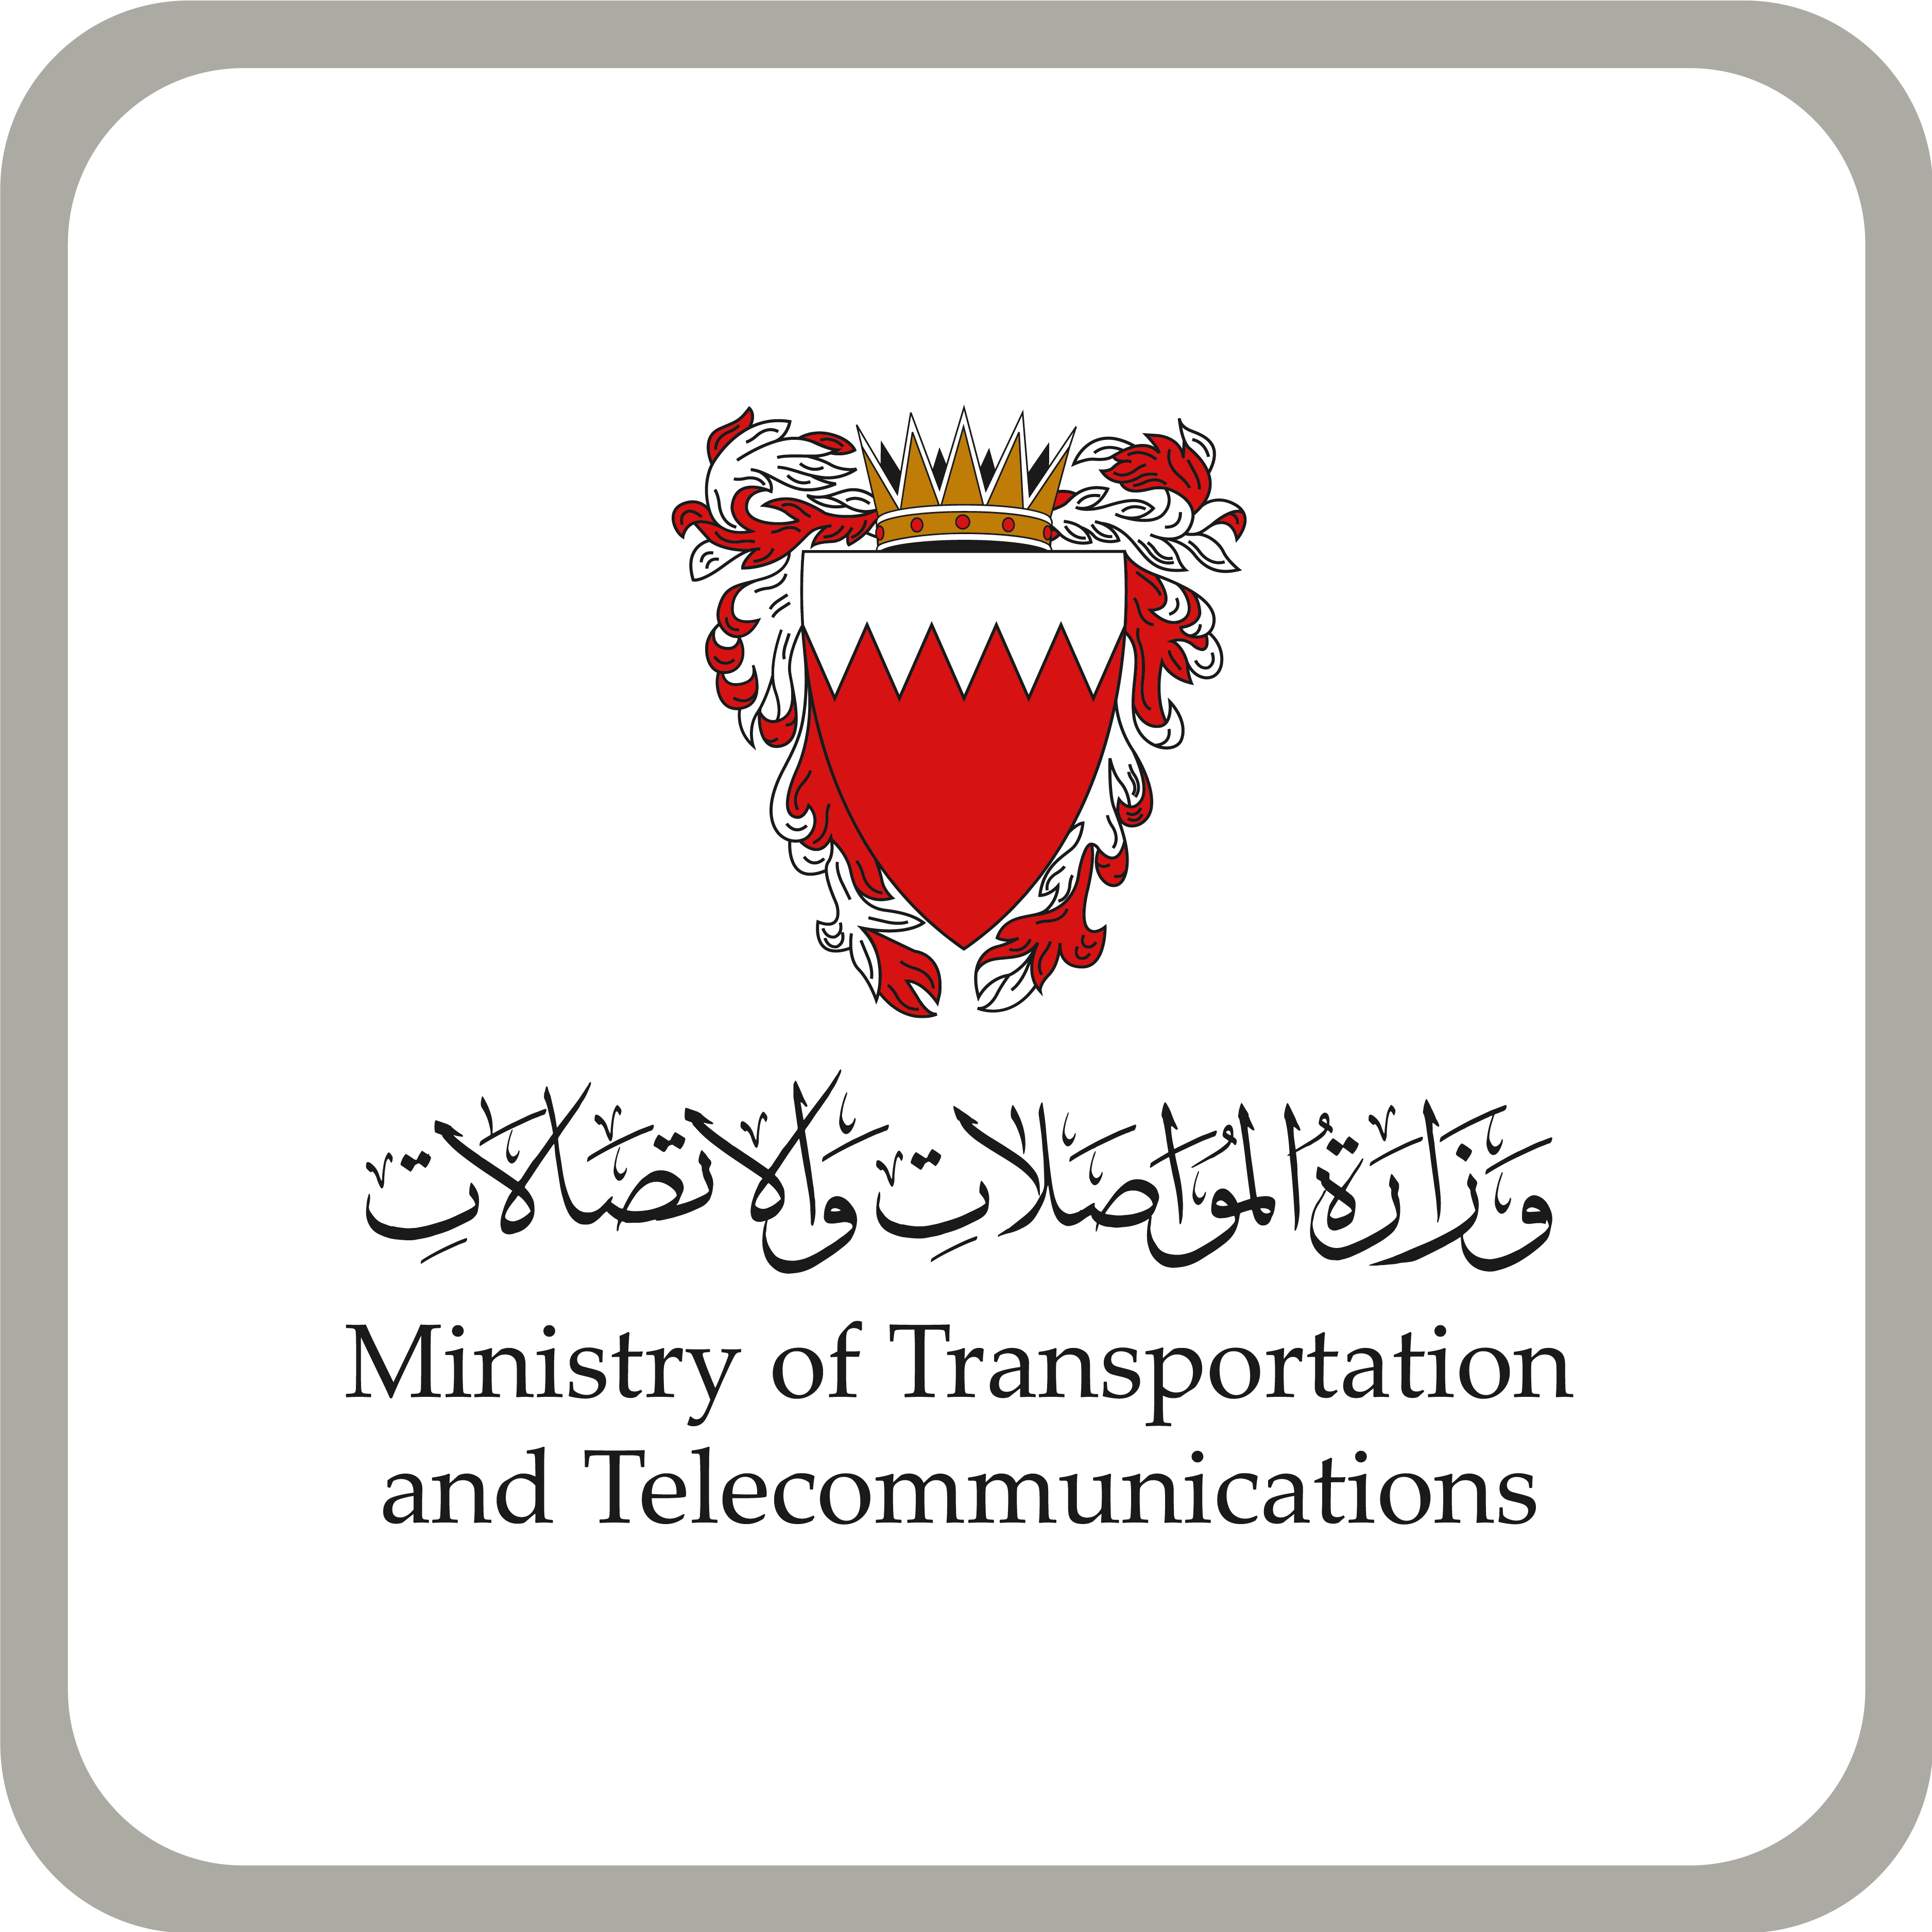 Ministry of Transportation and Telecommunication